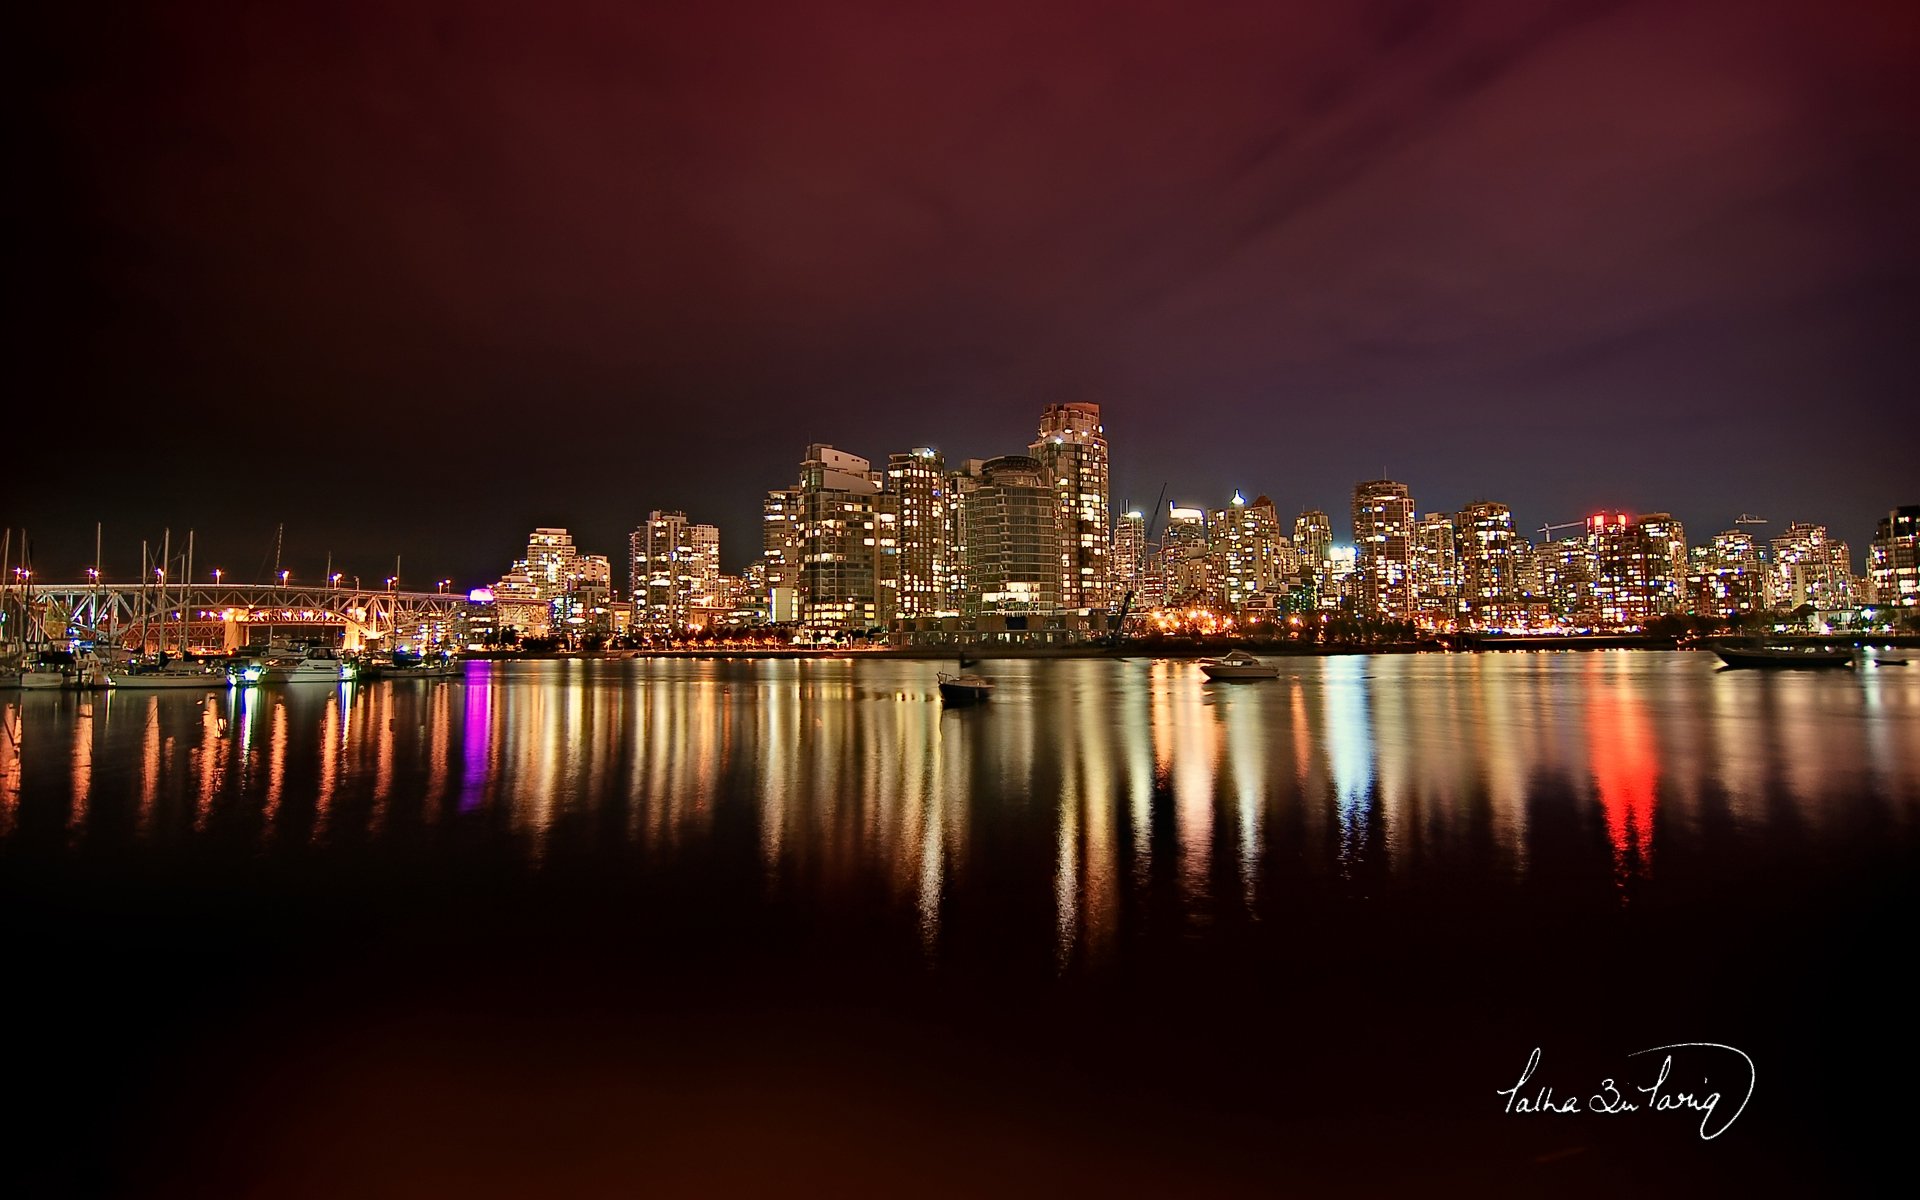 Granville Island Public Market Vancouver Canada 4K HD Travel Wallpapers   HD Wallpapers  ID 81009